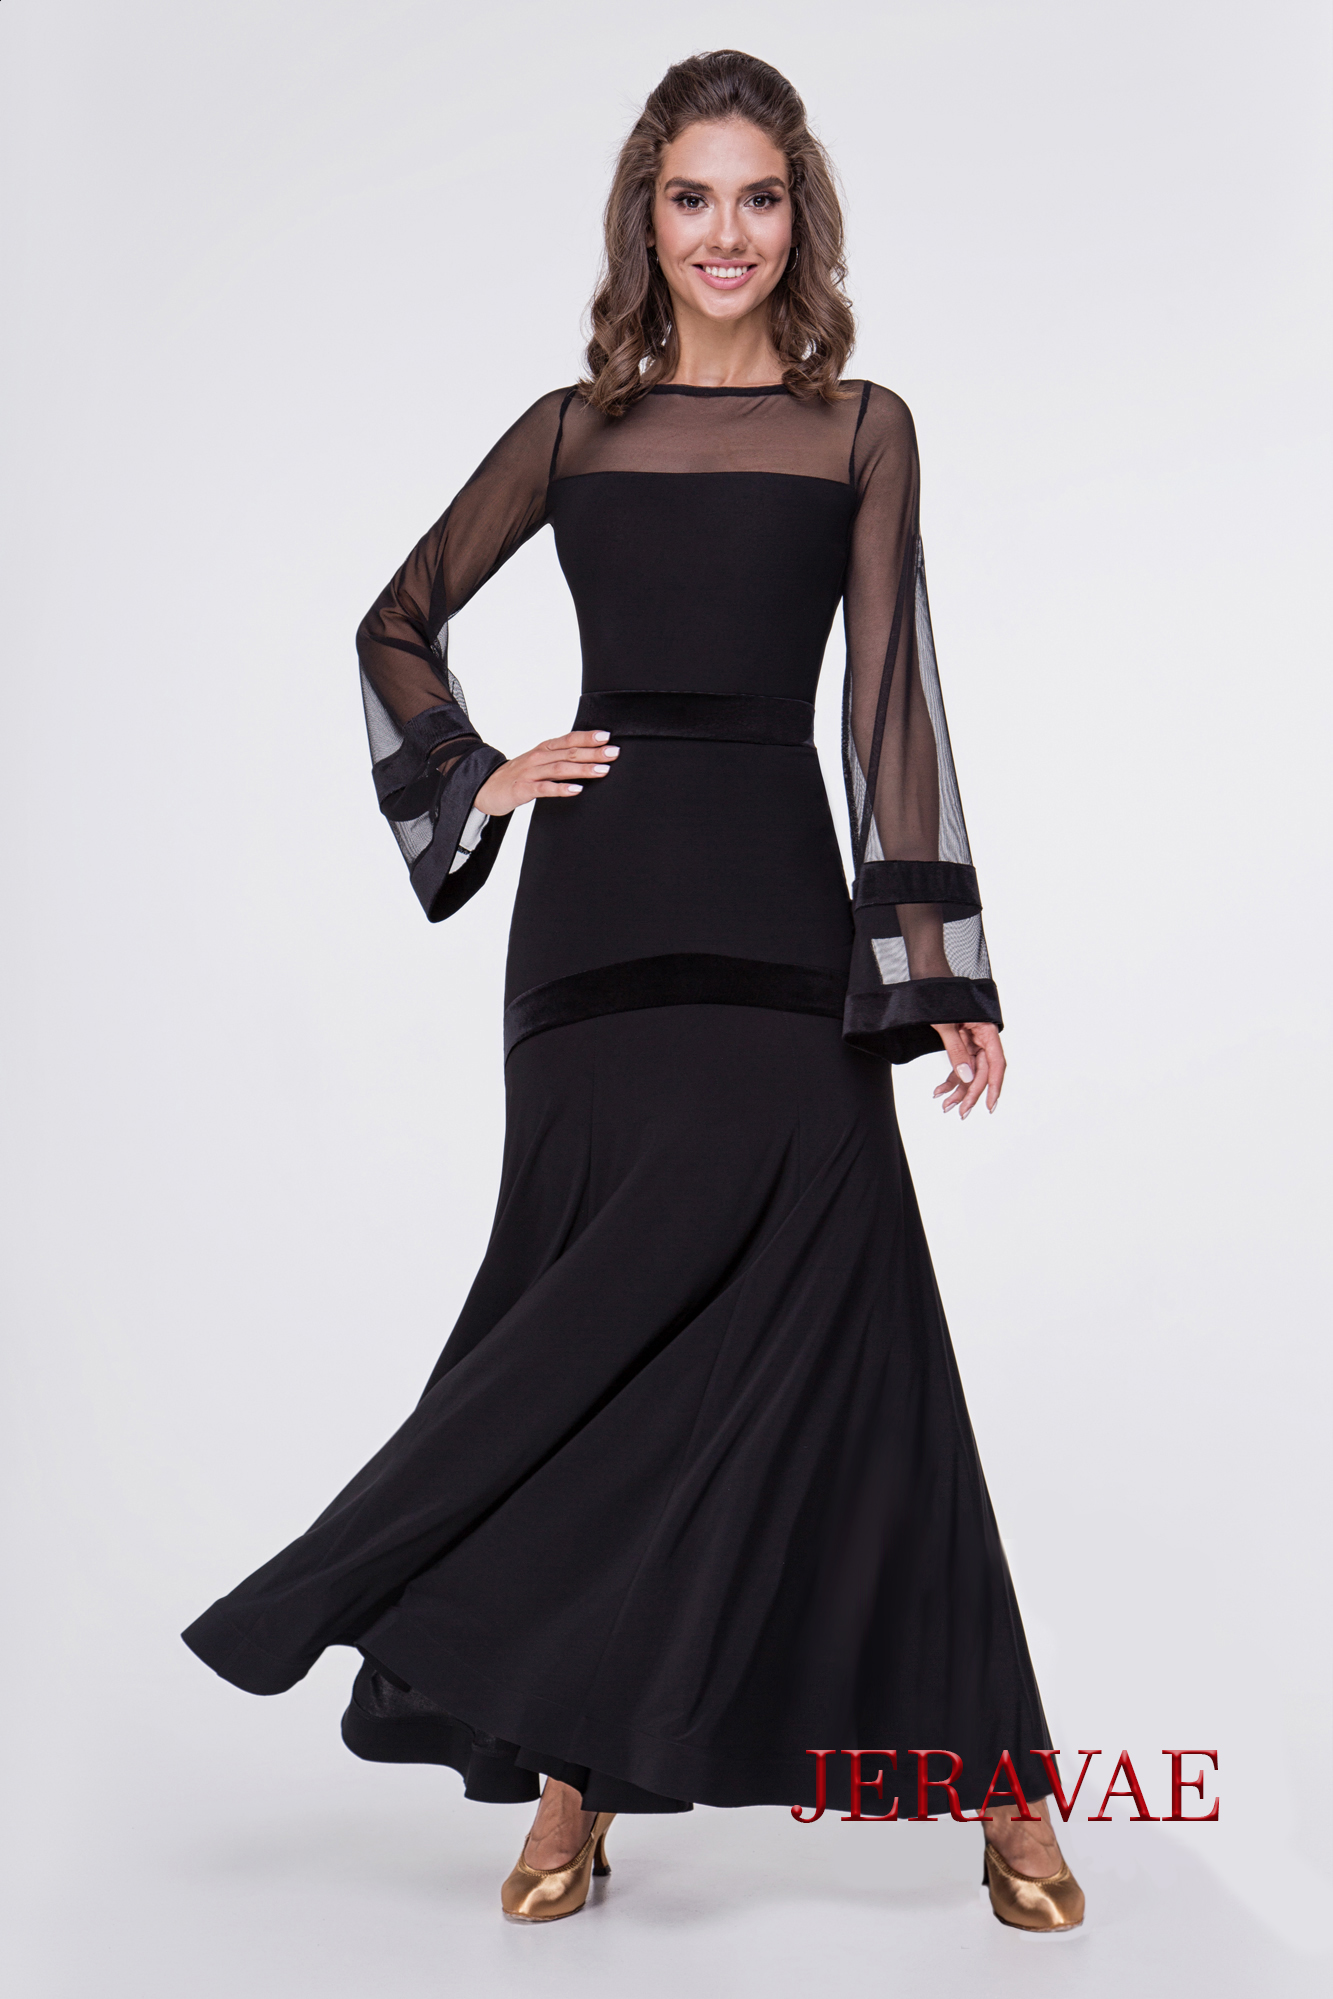 a dance model posing in a black dance top with mesh long sleeves across the top and velvet details at the wrist with the matching ballroom skirt with velvet details at waist